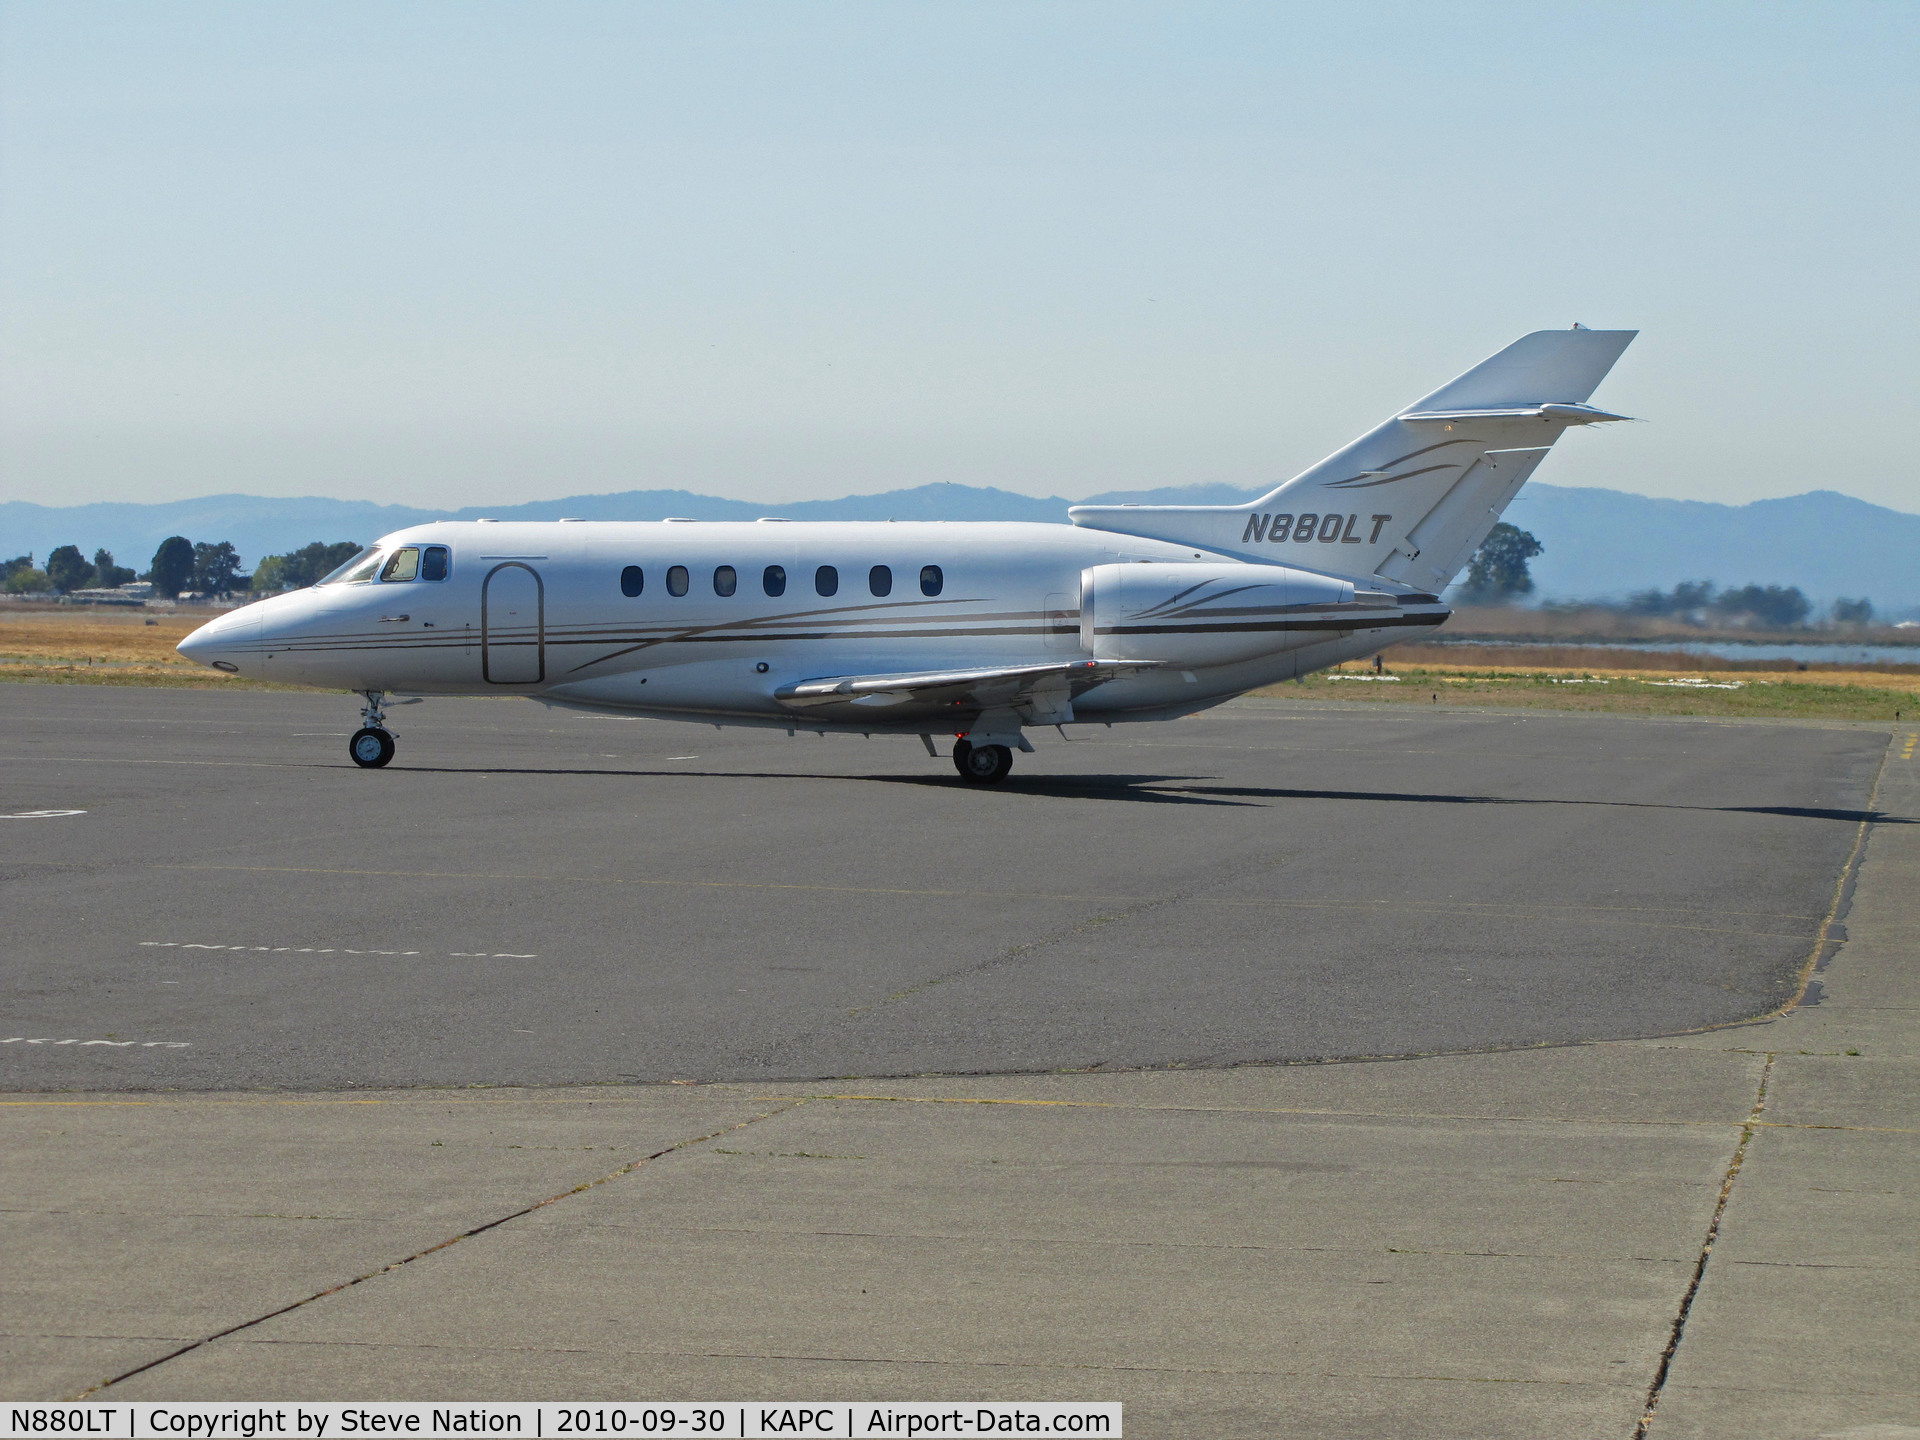 N880LT, 1996 Raytheon Corporate Jets Inc Hawker 1000 C/N 259051, MN-based Life Time Fitness 1996 Hawker 1000 on arrival